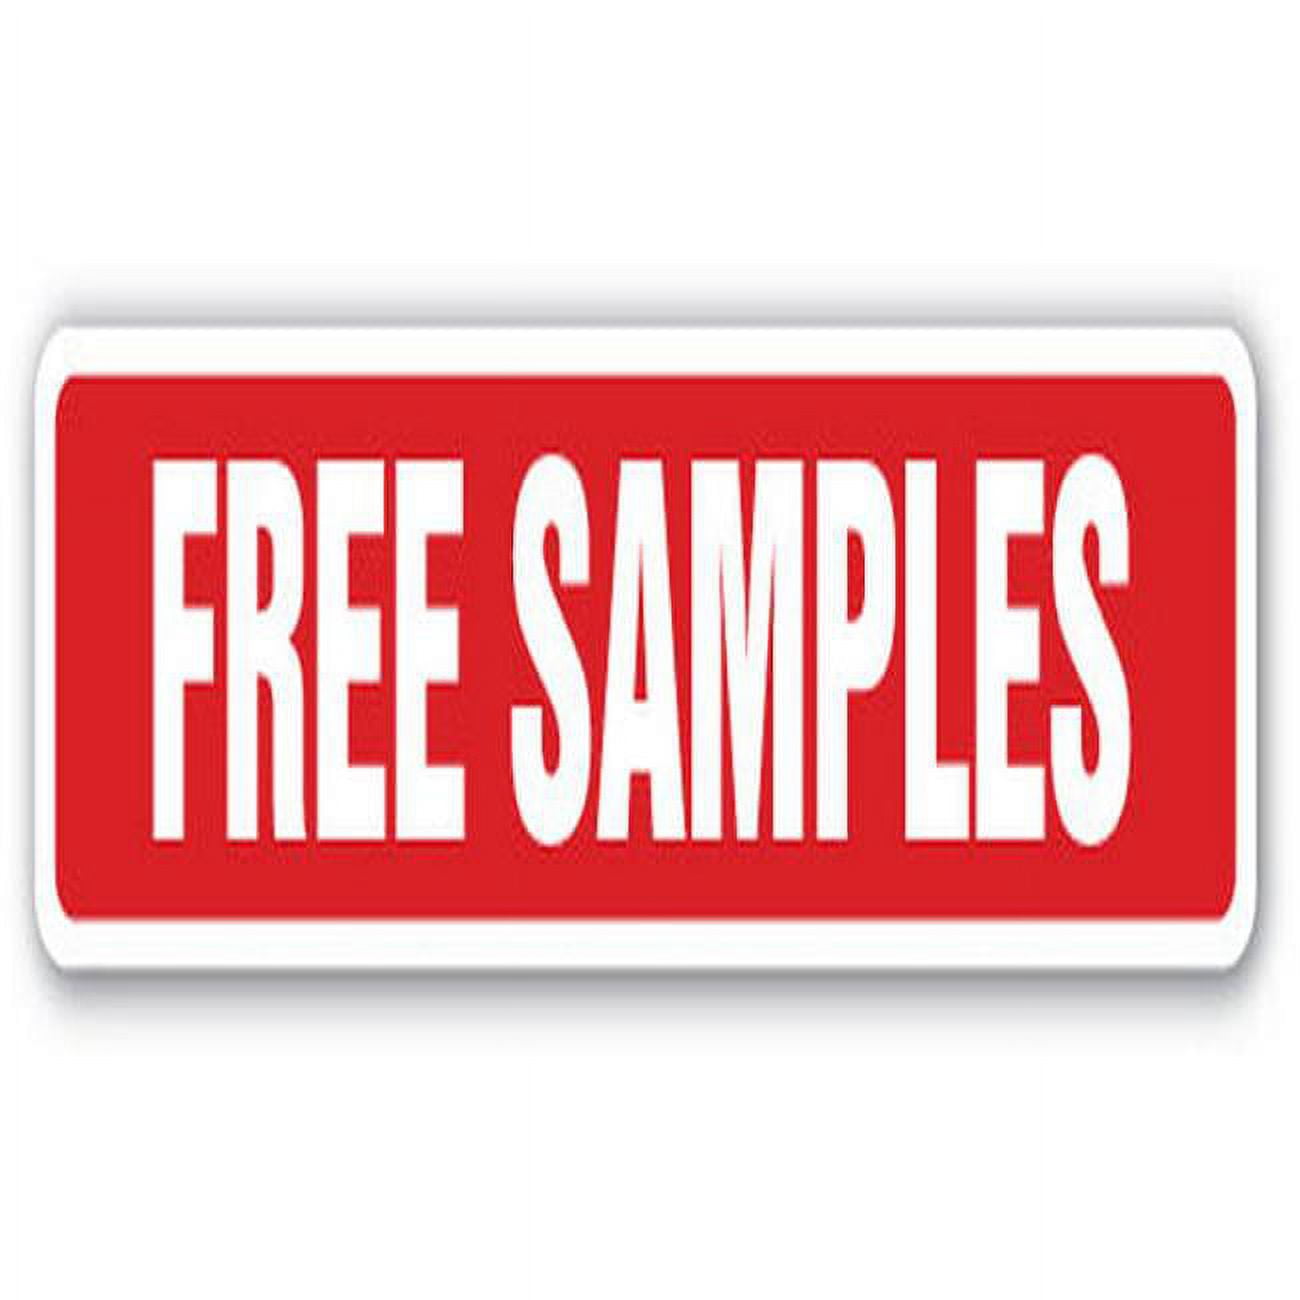 Free samples and giveaways